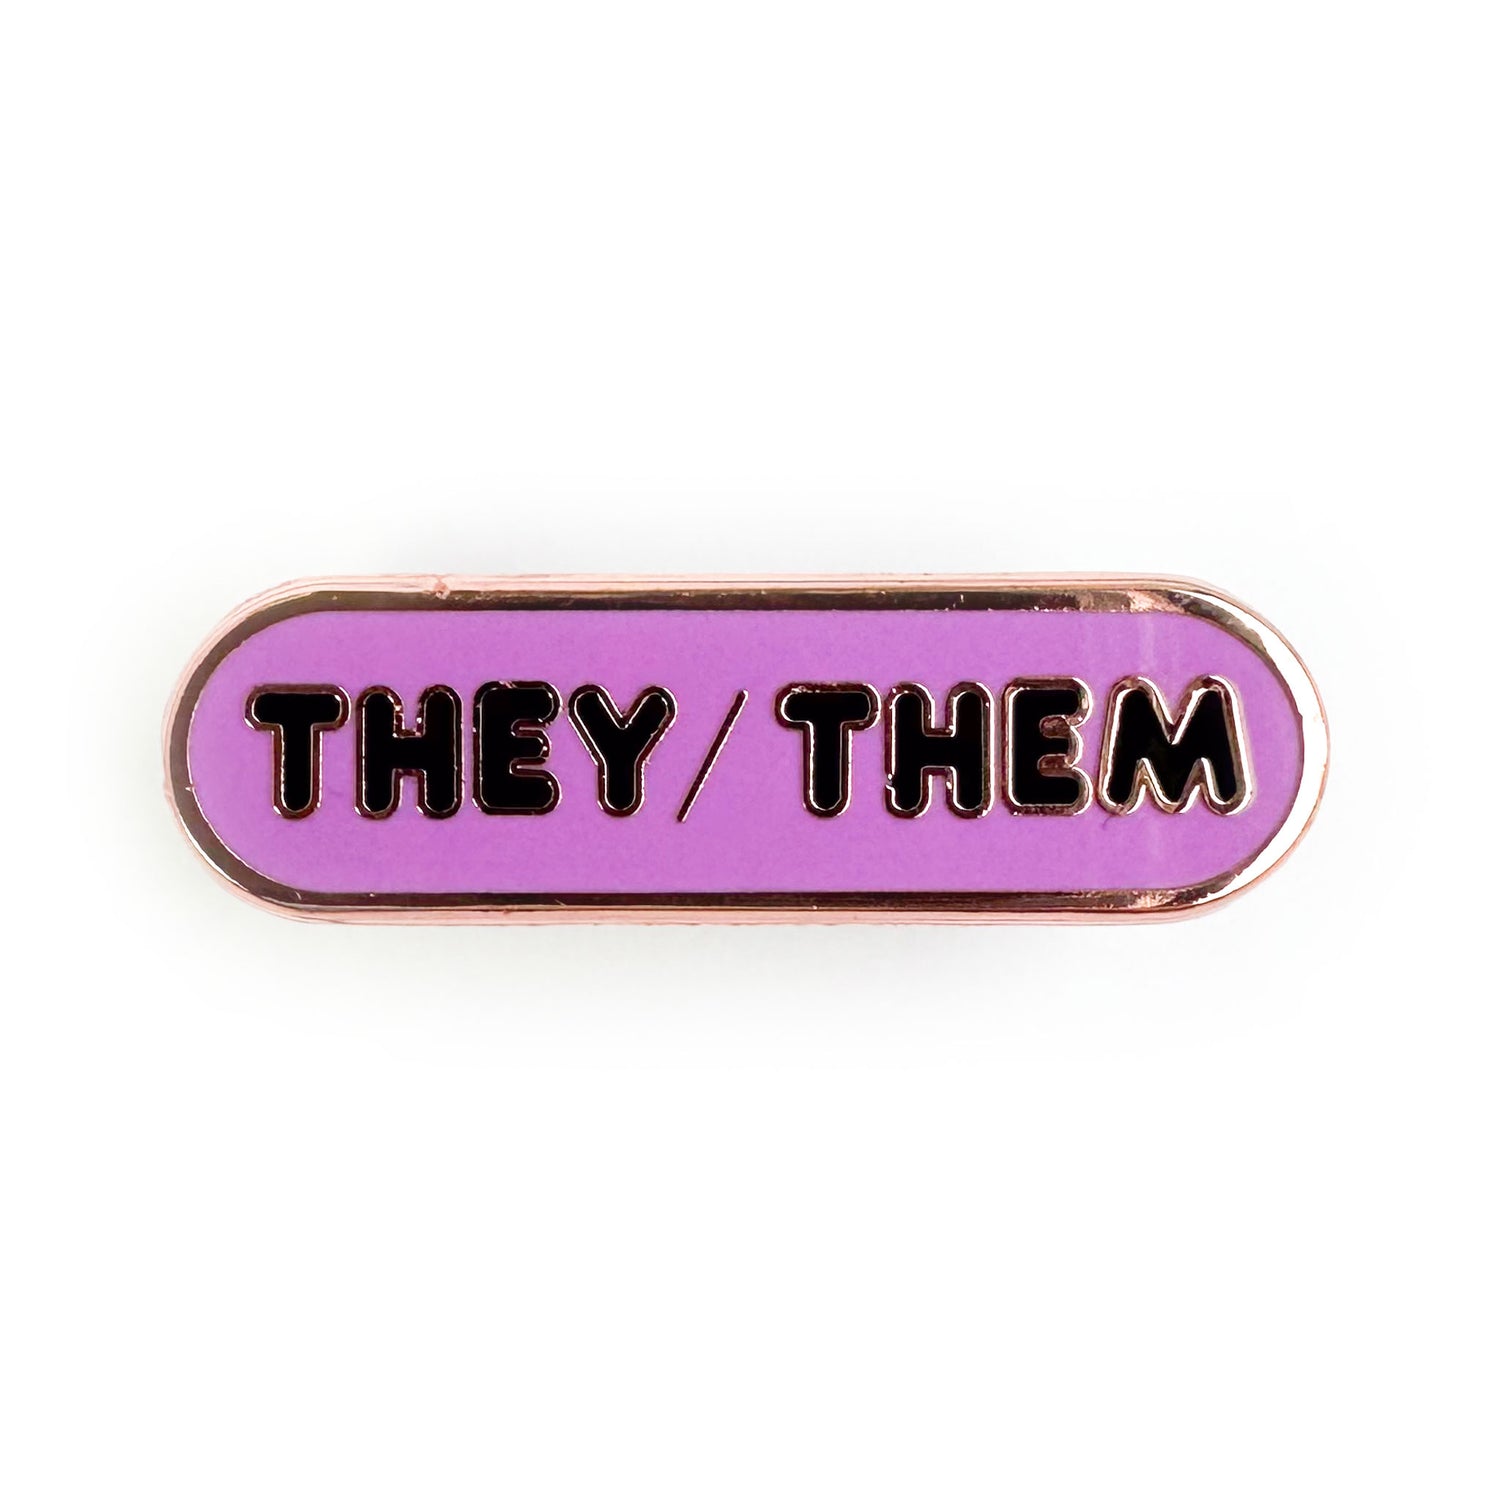 A bandaid shaped pin with a lavender background and black bubble letters on it that spell "They/Them".